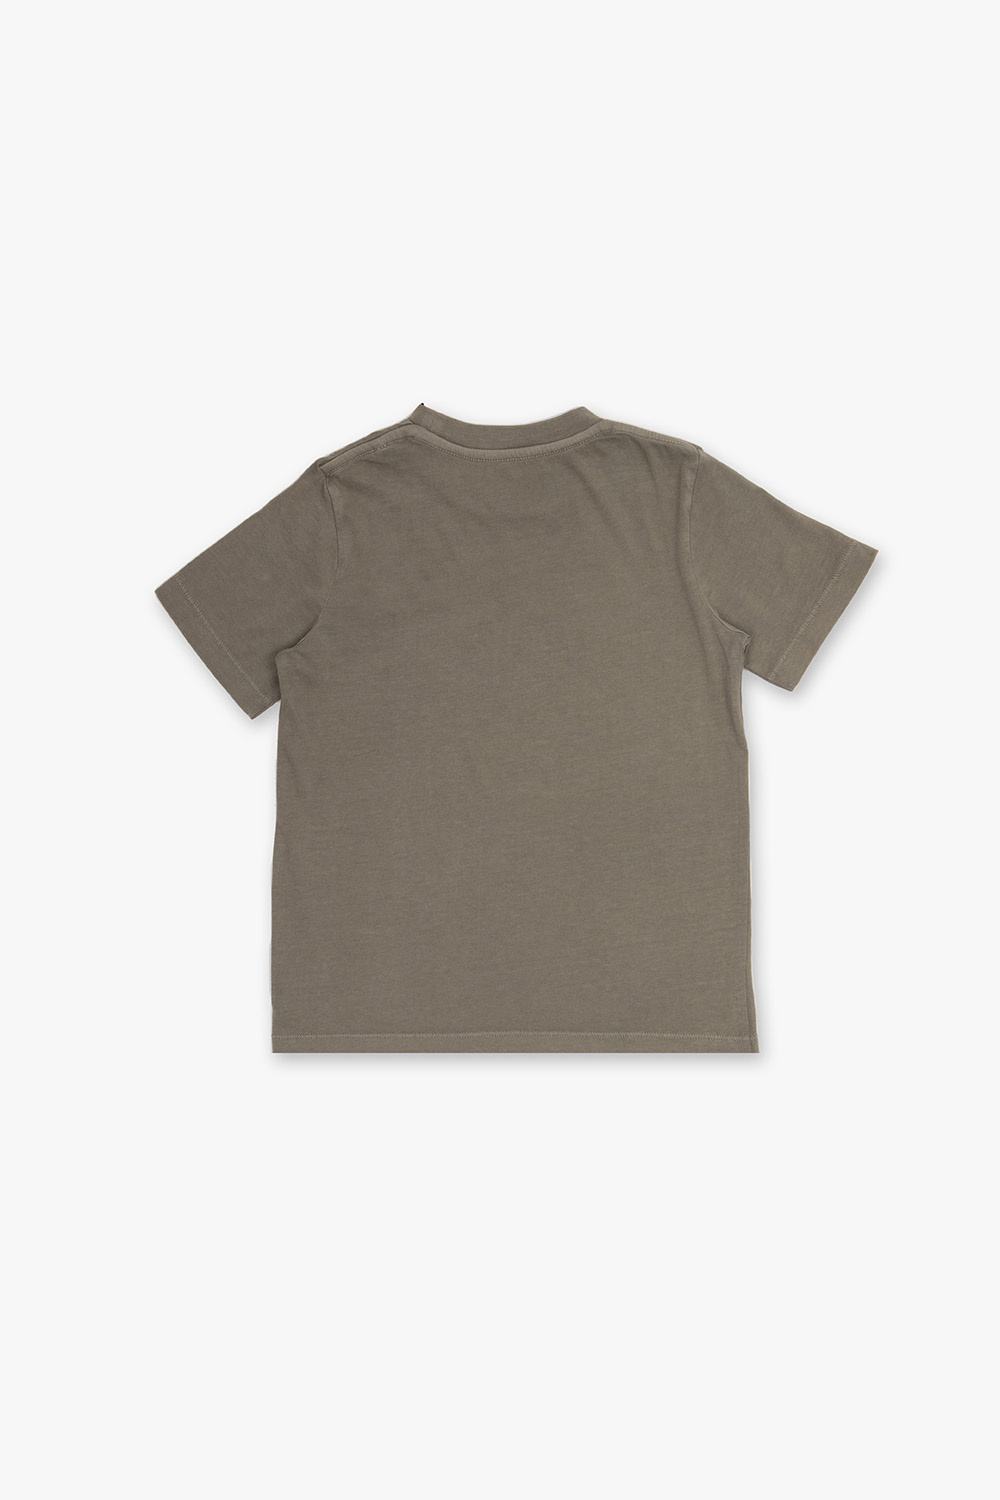 Zadig & Voltaire Kids Includes three organic cotton t-shirts